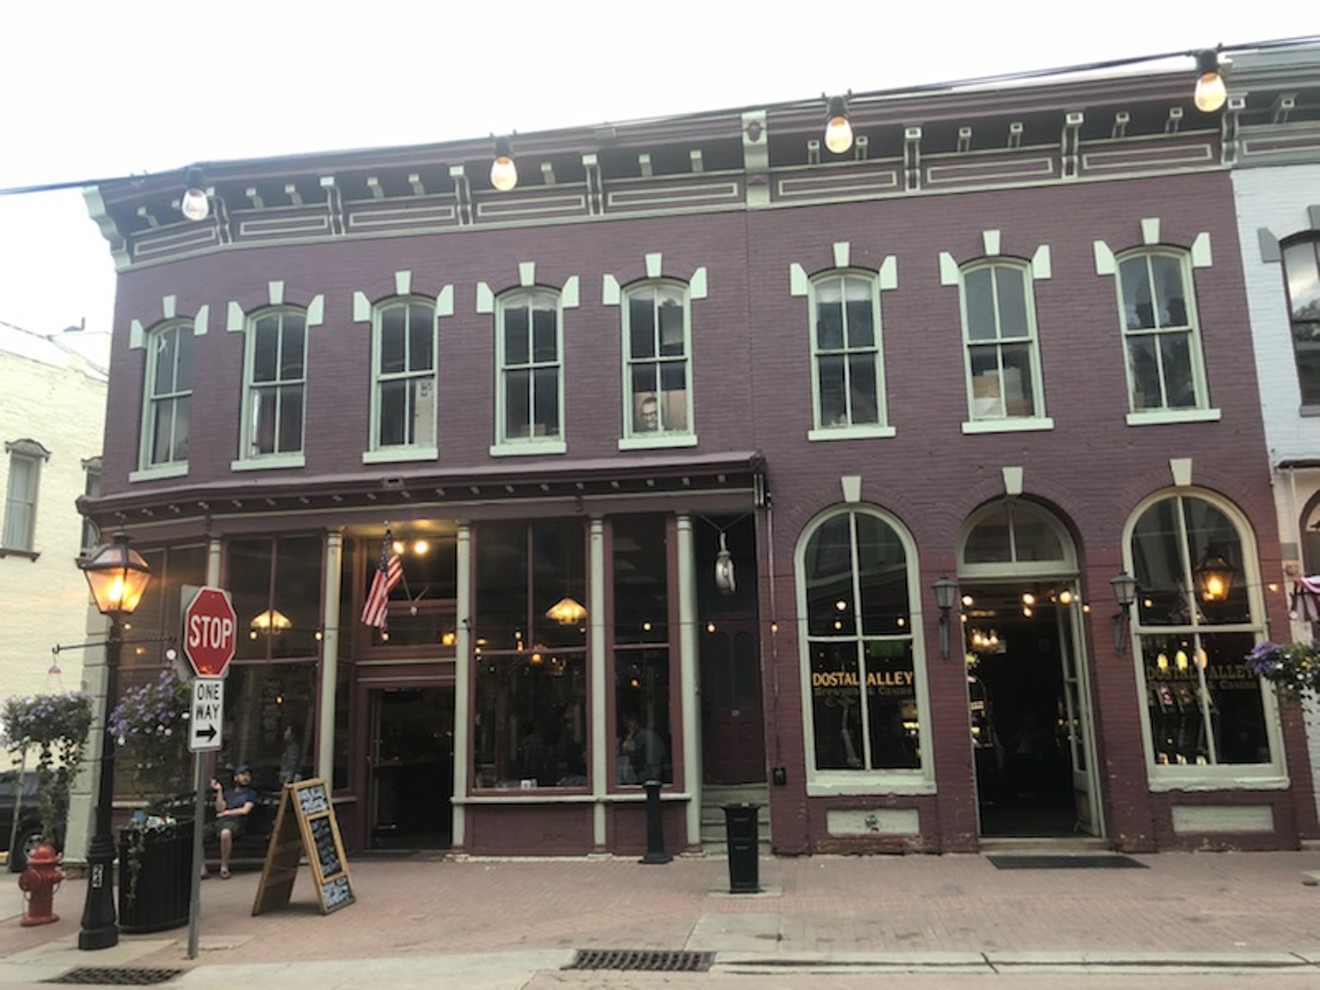 Dostal Alley Casino & Brew Pub is here for locals and tourists at 116 Main Street in Central City.